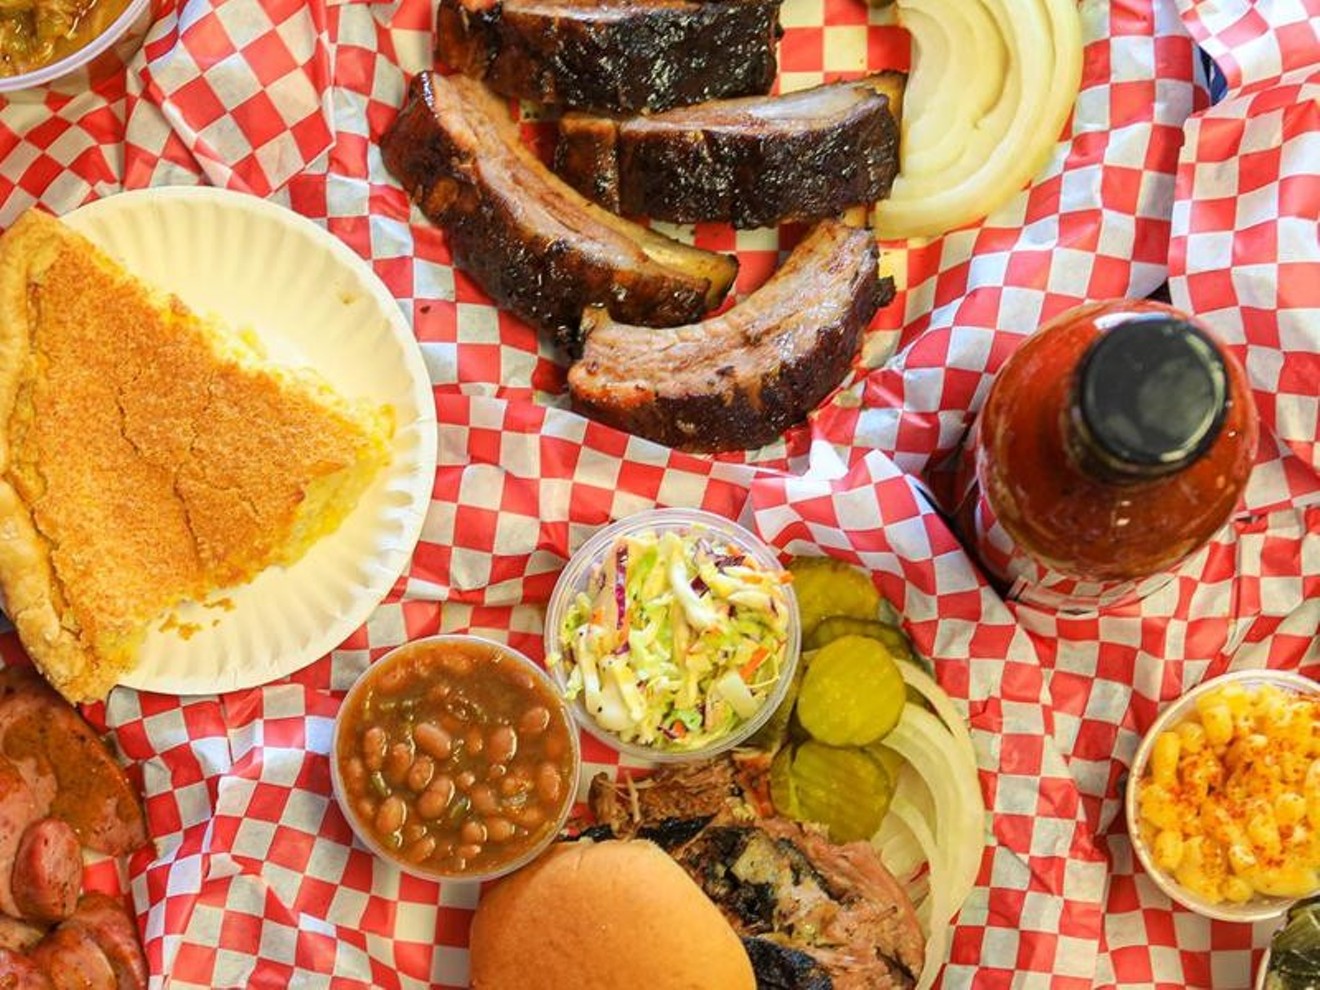 Southern barbecue favorites, all made in-house.